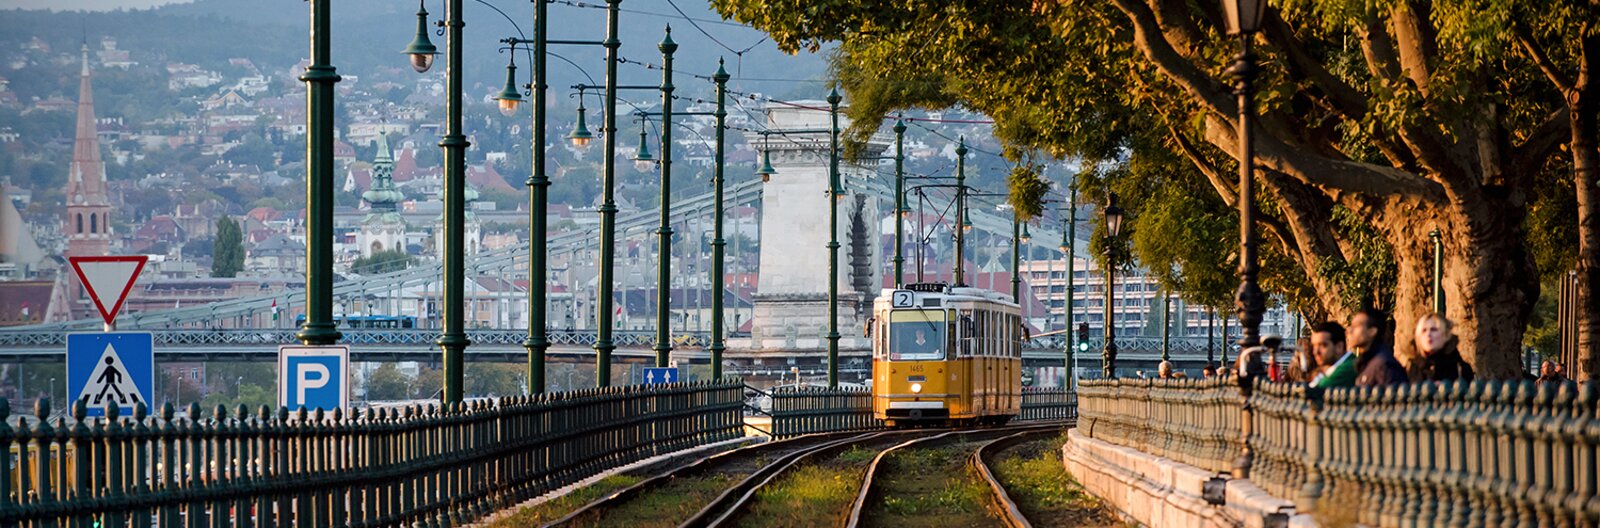 Tram 2, the iconic transportation line next to the Danube